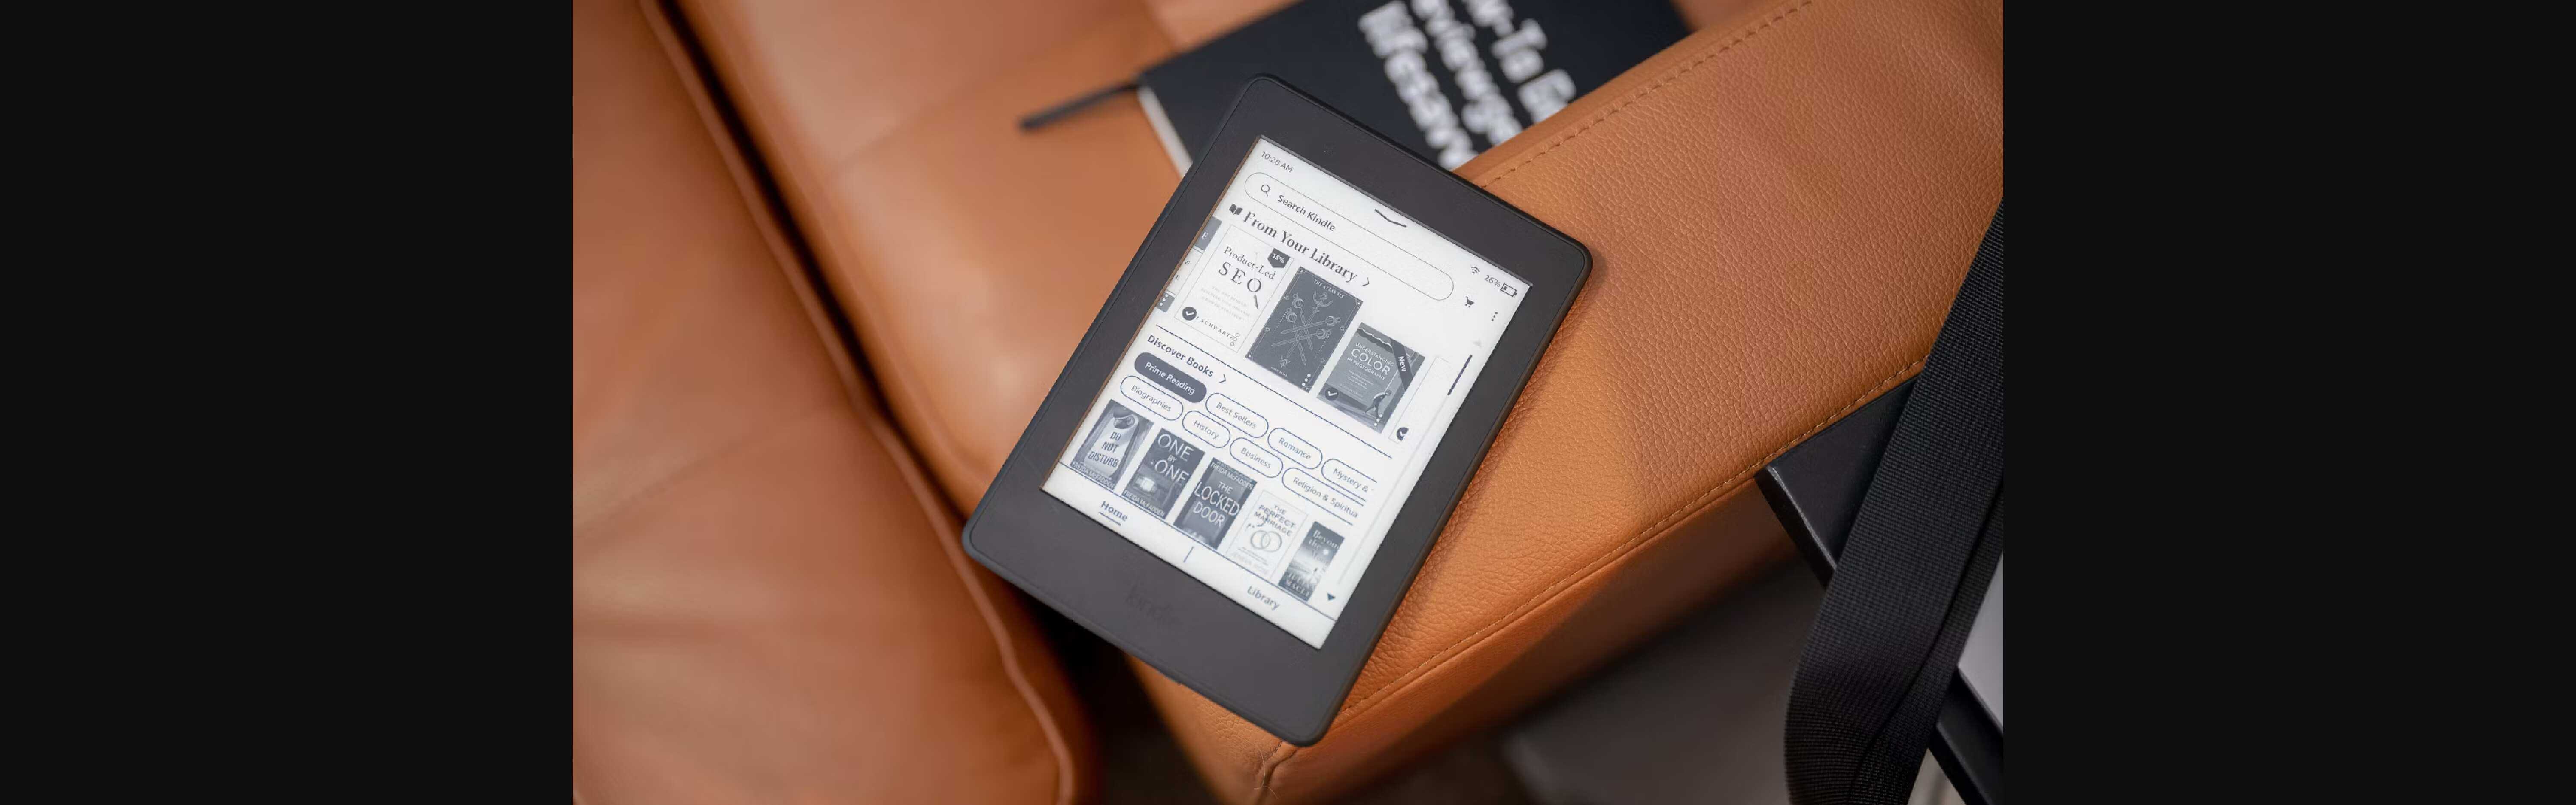 How To Transfer Ebooks To Android Tablet